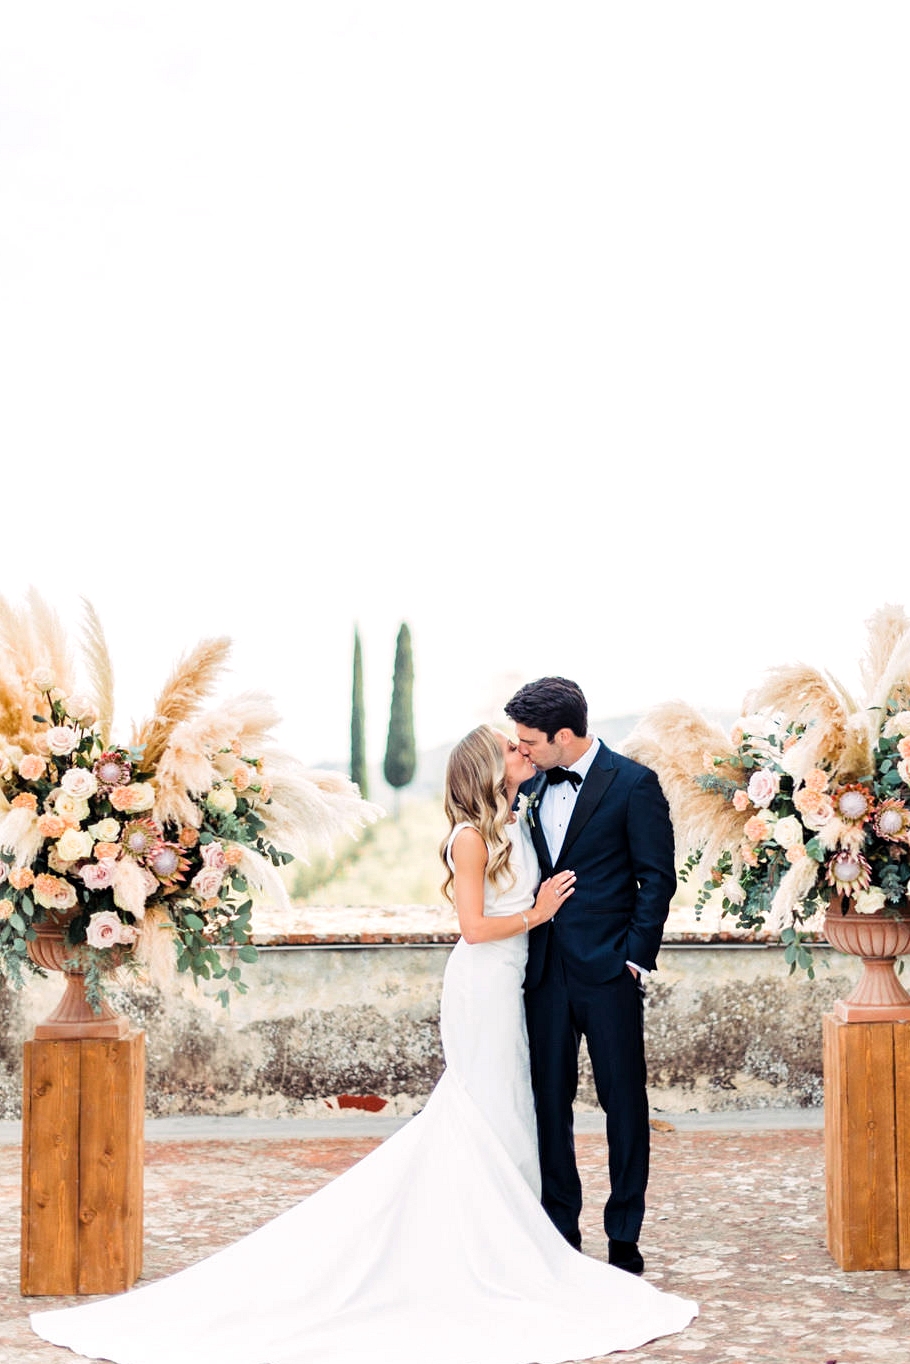 All Eyes On This Chic Soirée at this Wedding Venue in Florence ⋆ Ruffled